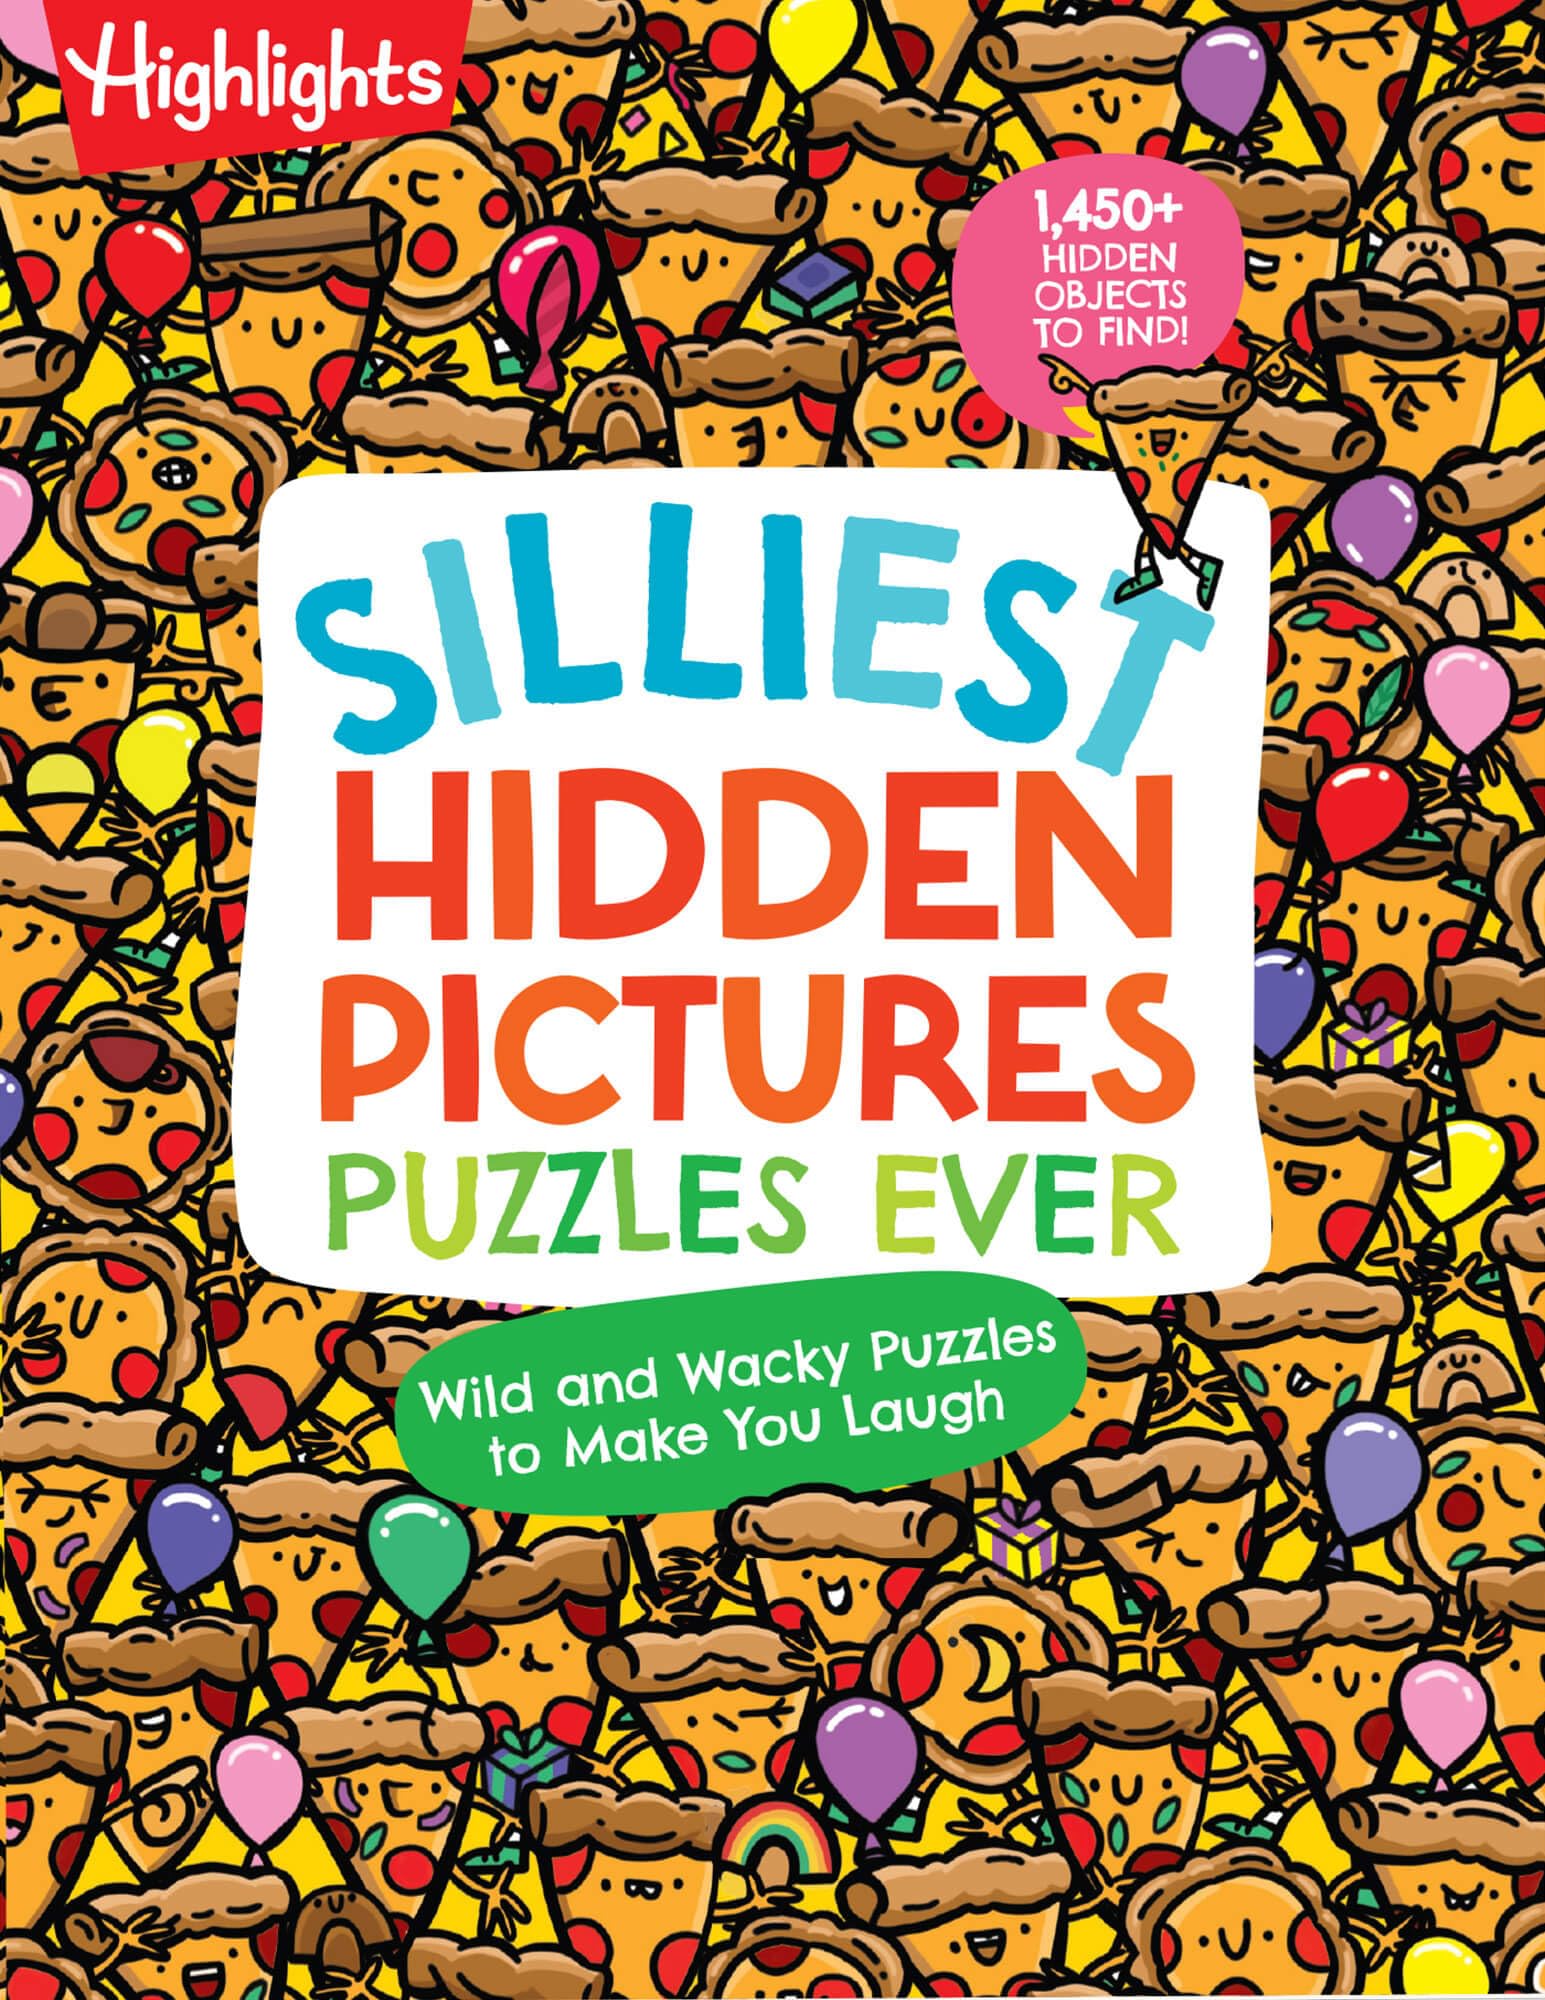 Silliest Hidden Pictures Puzzles Ever by Highlights